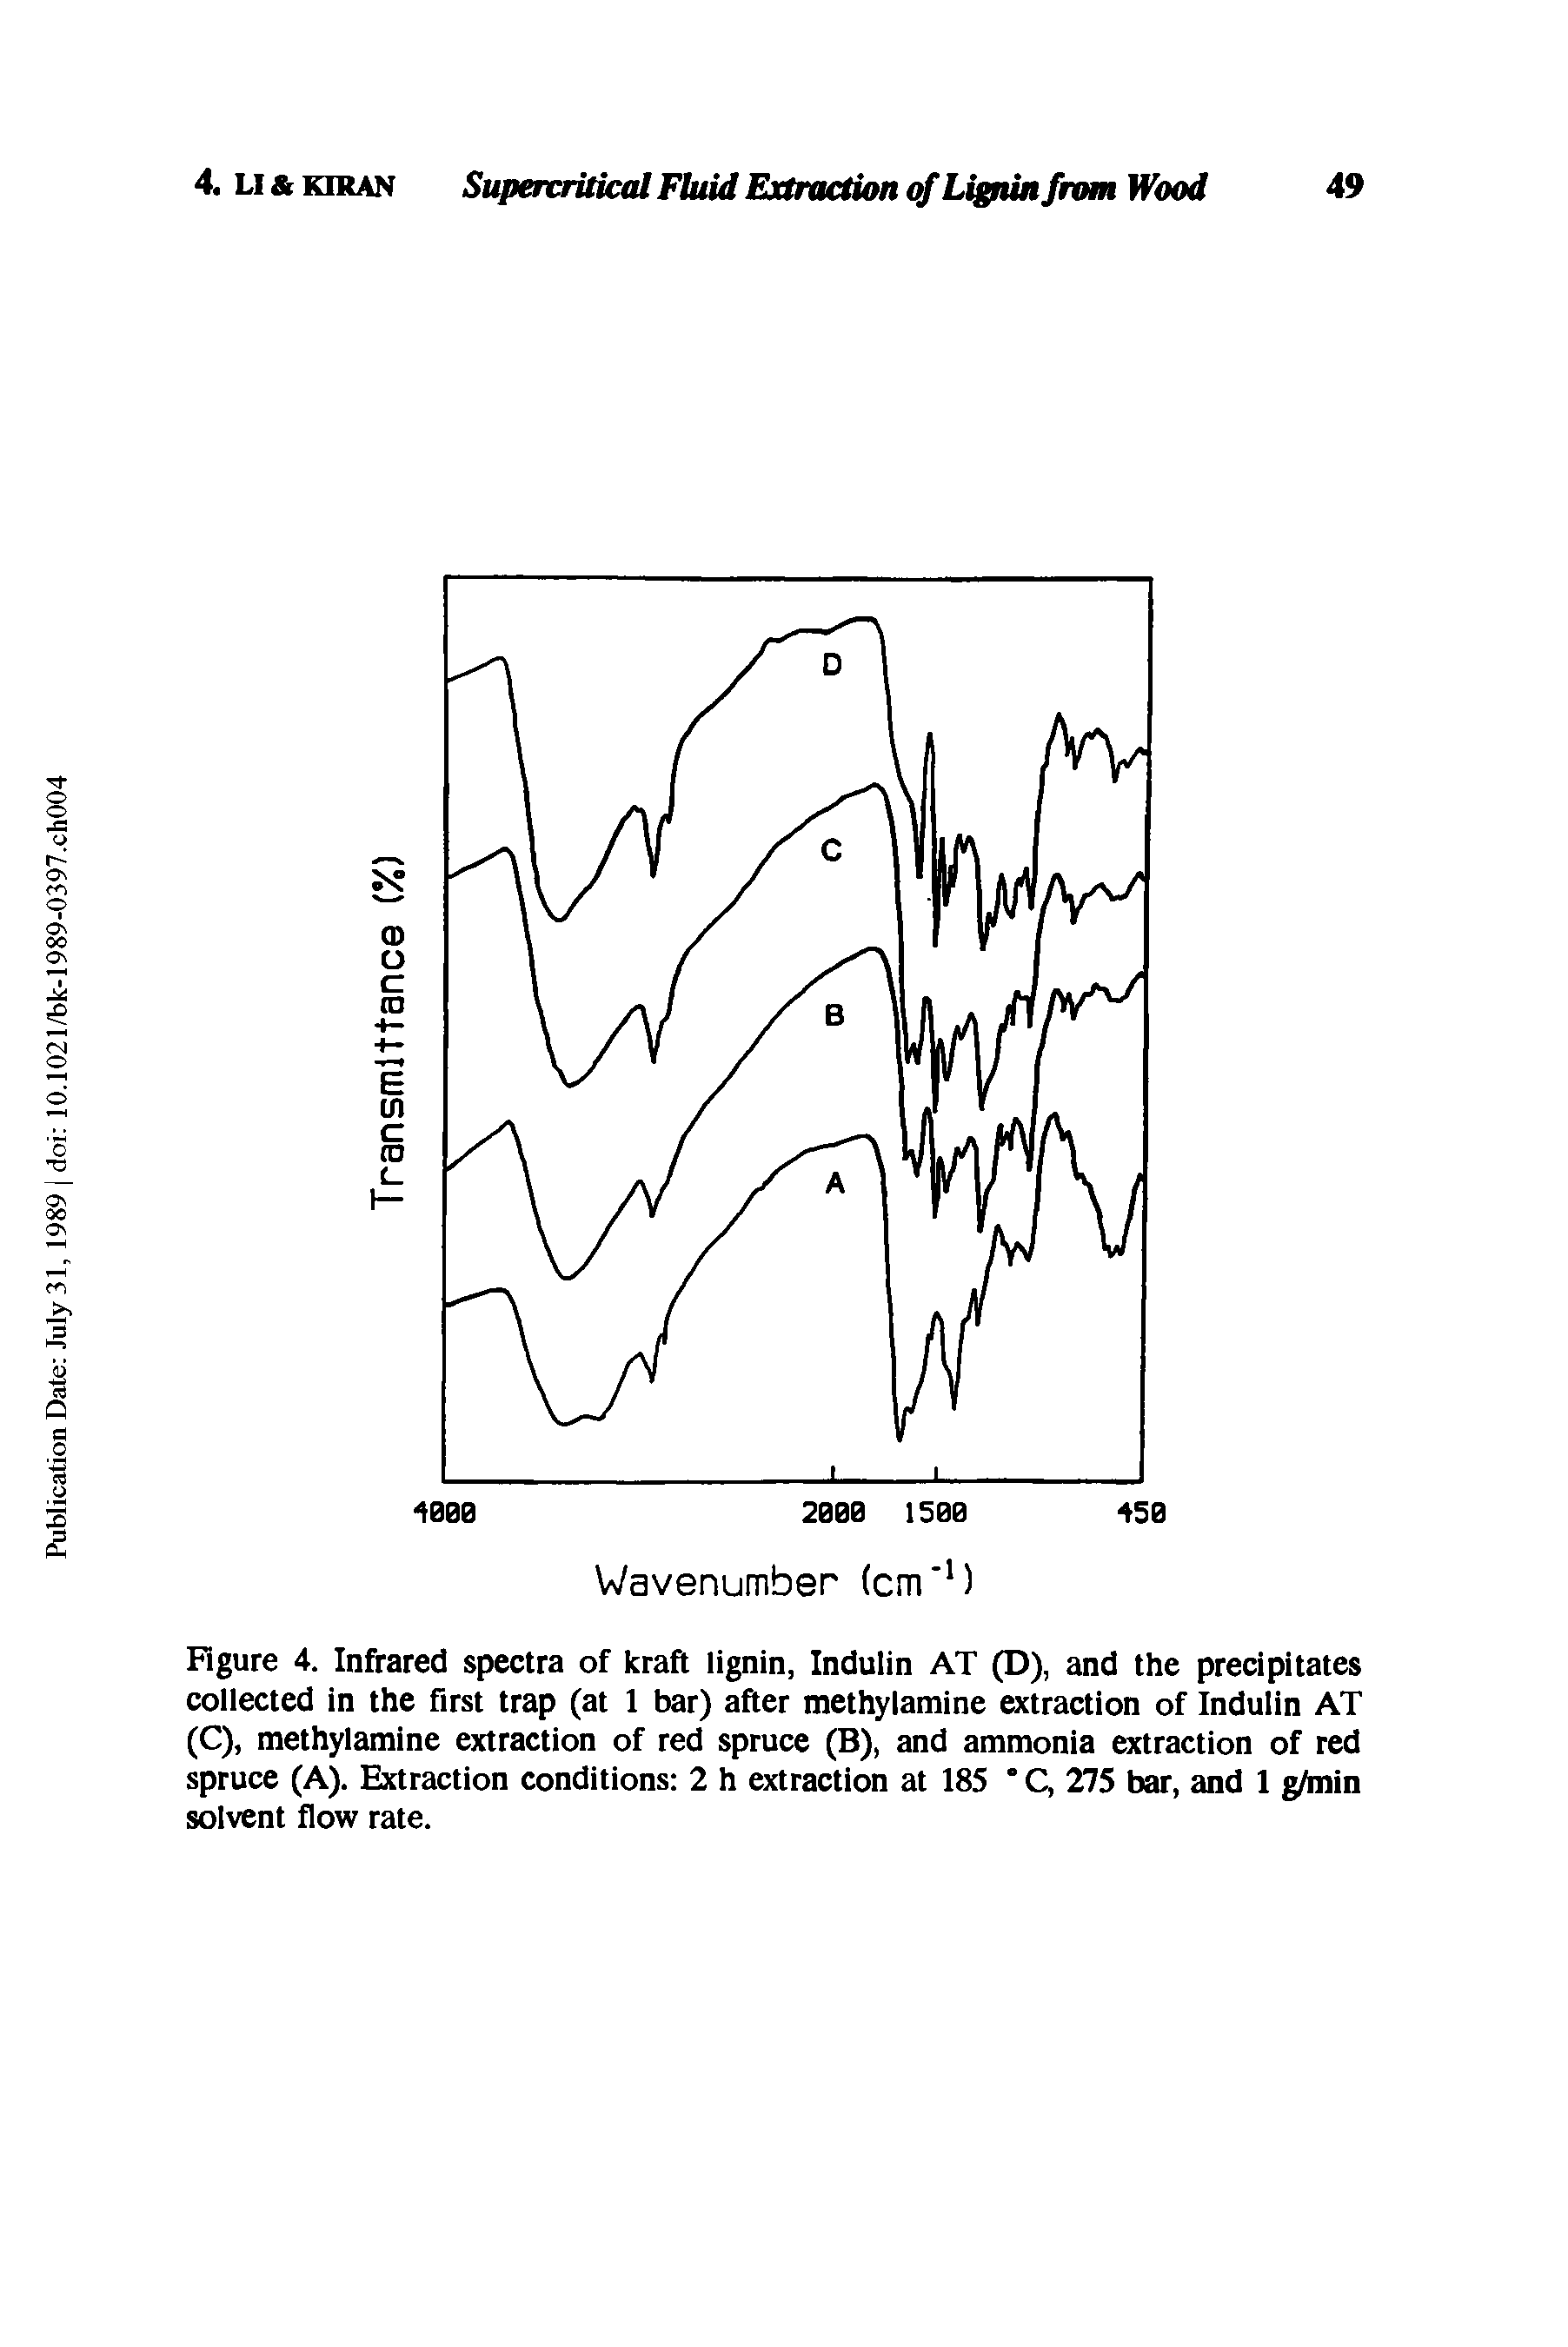 Figure 4. Infrared spectra of kraft lignin, Indulin AT (D), and the precipitates collected in the first trap (at 1 bar) after methylamine extraction of Indulin AT (C), methylamine extraction of red spruce (B), and ammonia extraction of red spruce (A). Extraction conditions 2 h extraction at 185 ° C, 275 bar, and 1 g/min solvent flow rate.